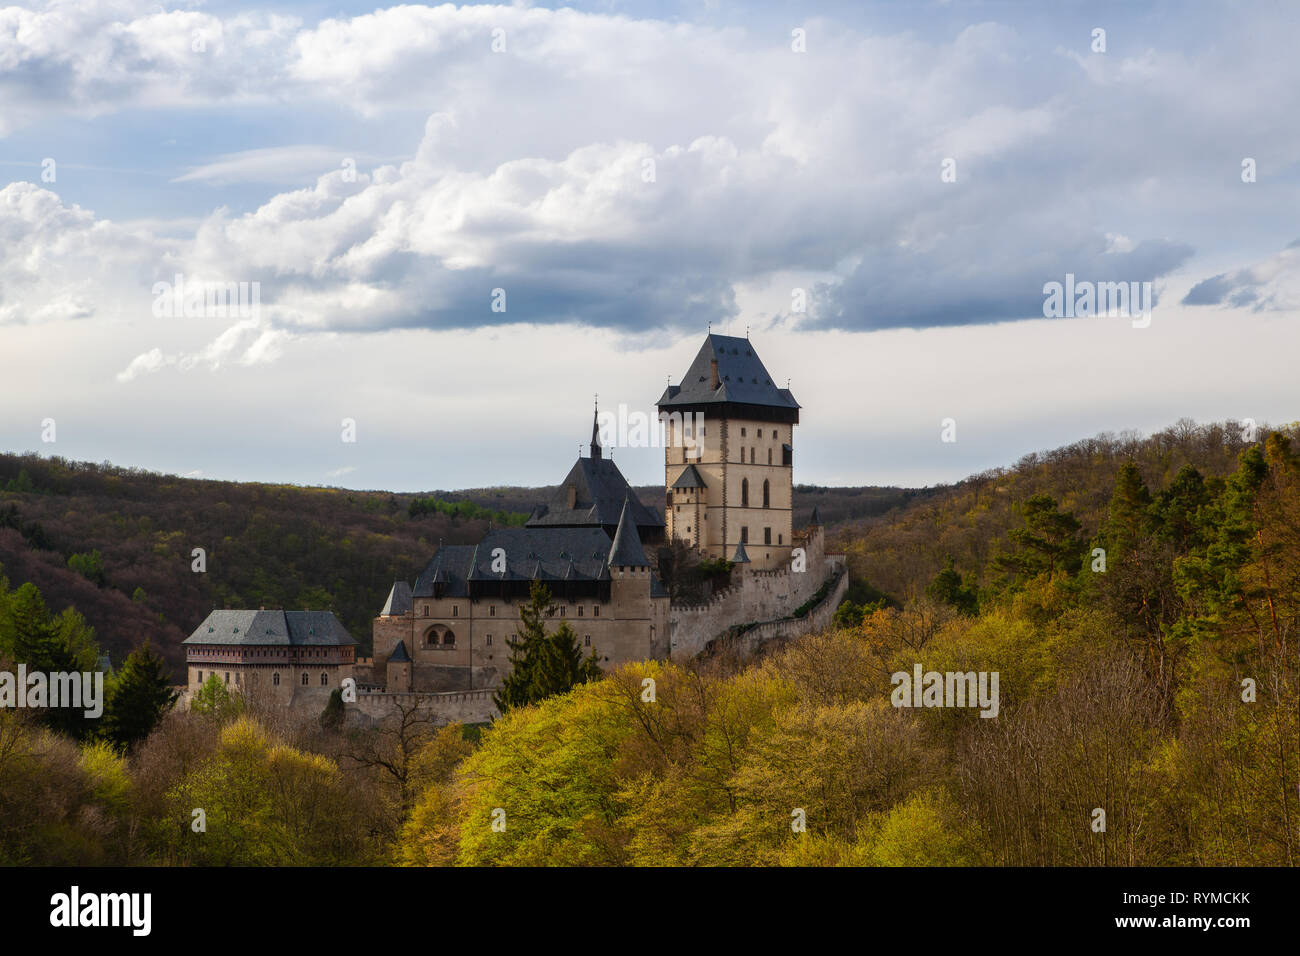 Famous Karlstejn castle  near Prague in Czech Republic. It is a large Gothic castle founded 1348 CE by Charles IV, Holy Roman Emperor-elect and King o Stock Photo